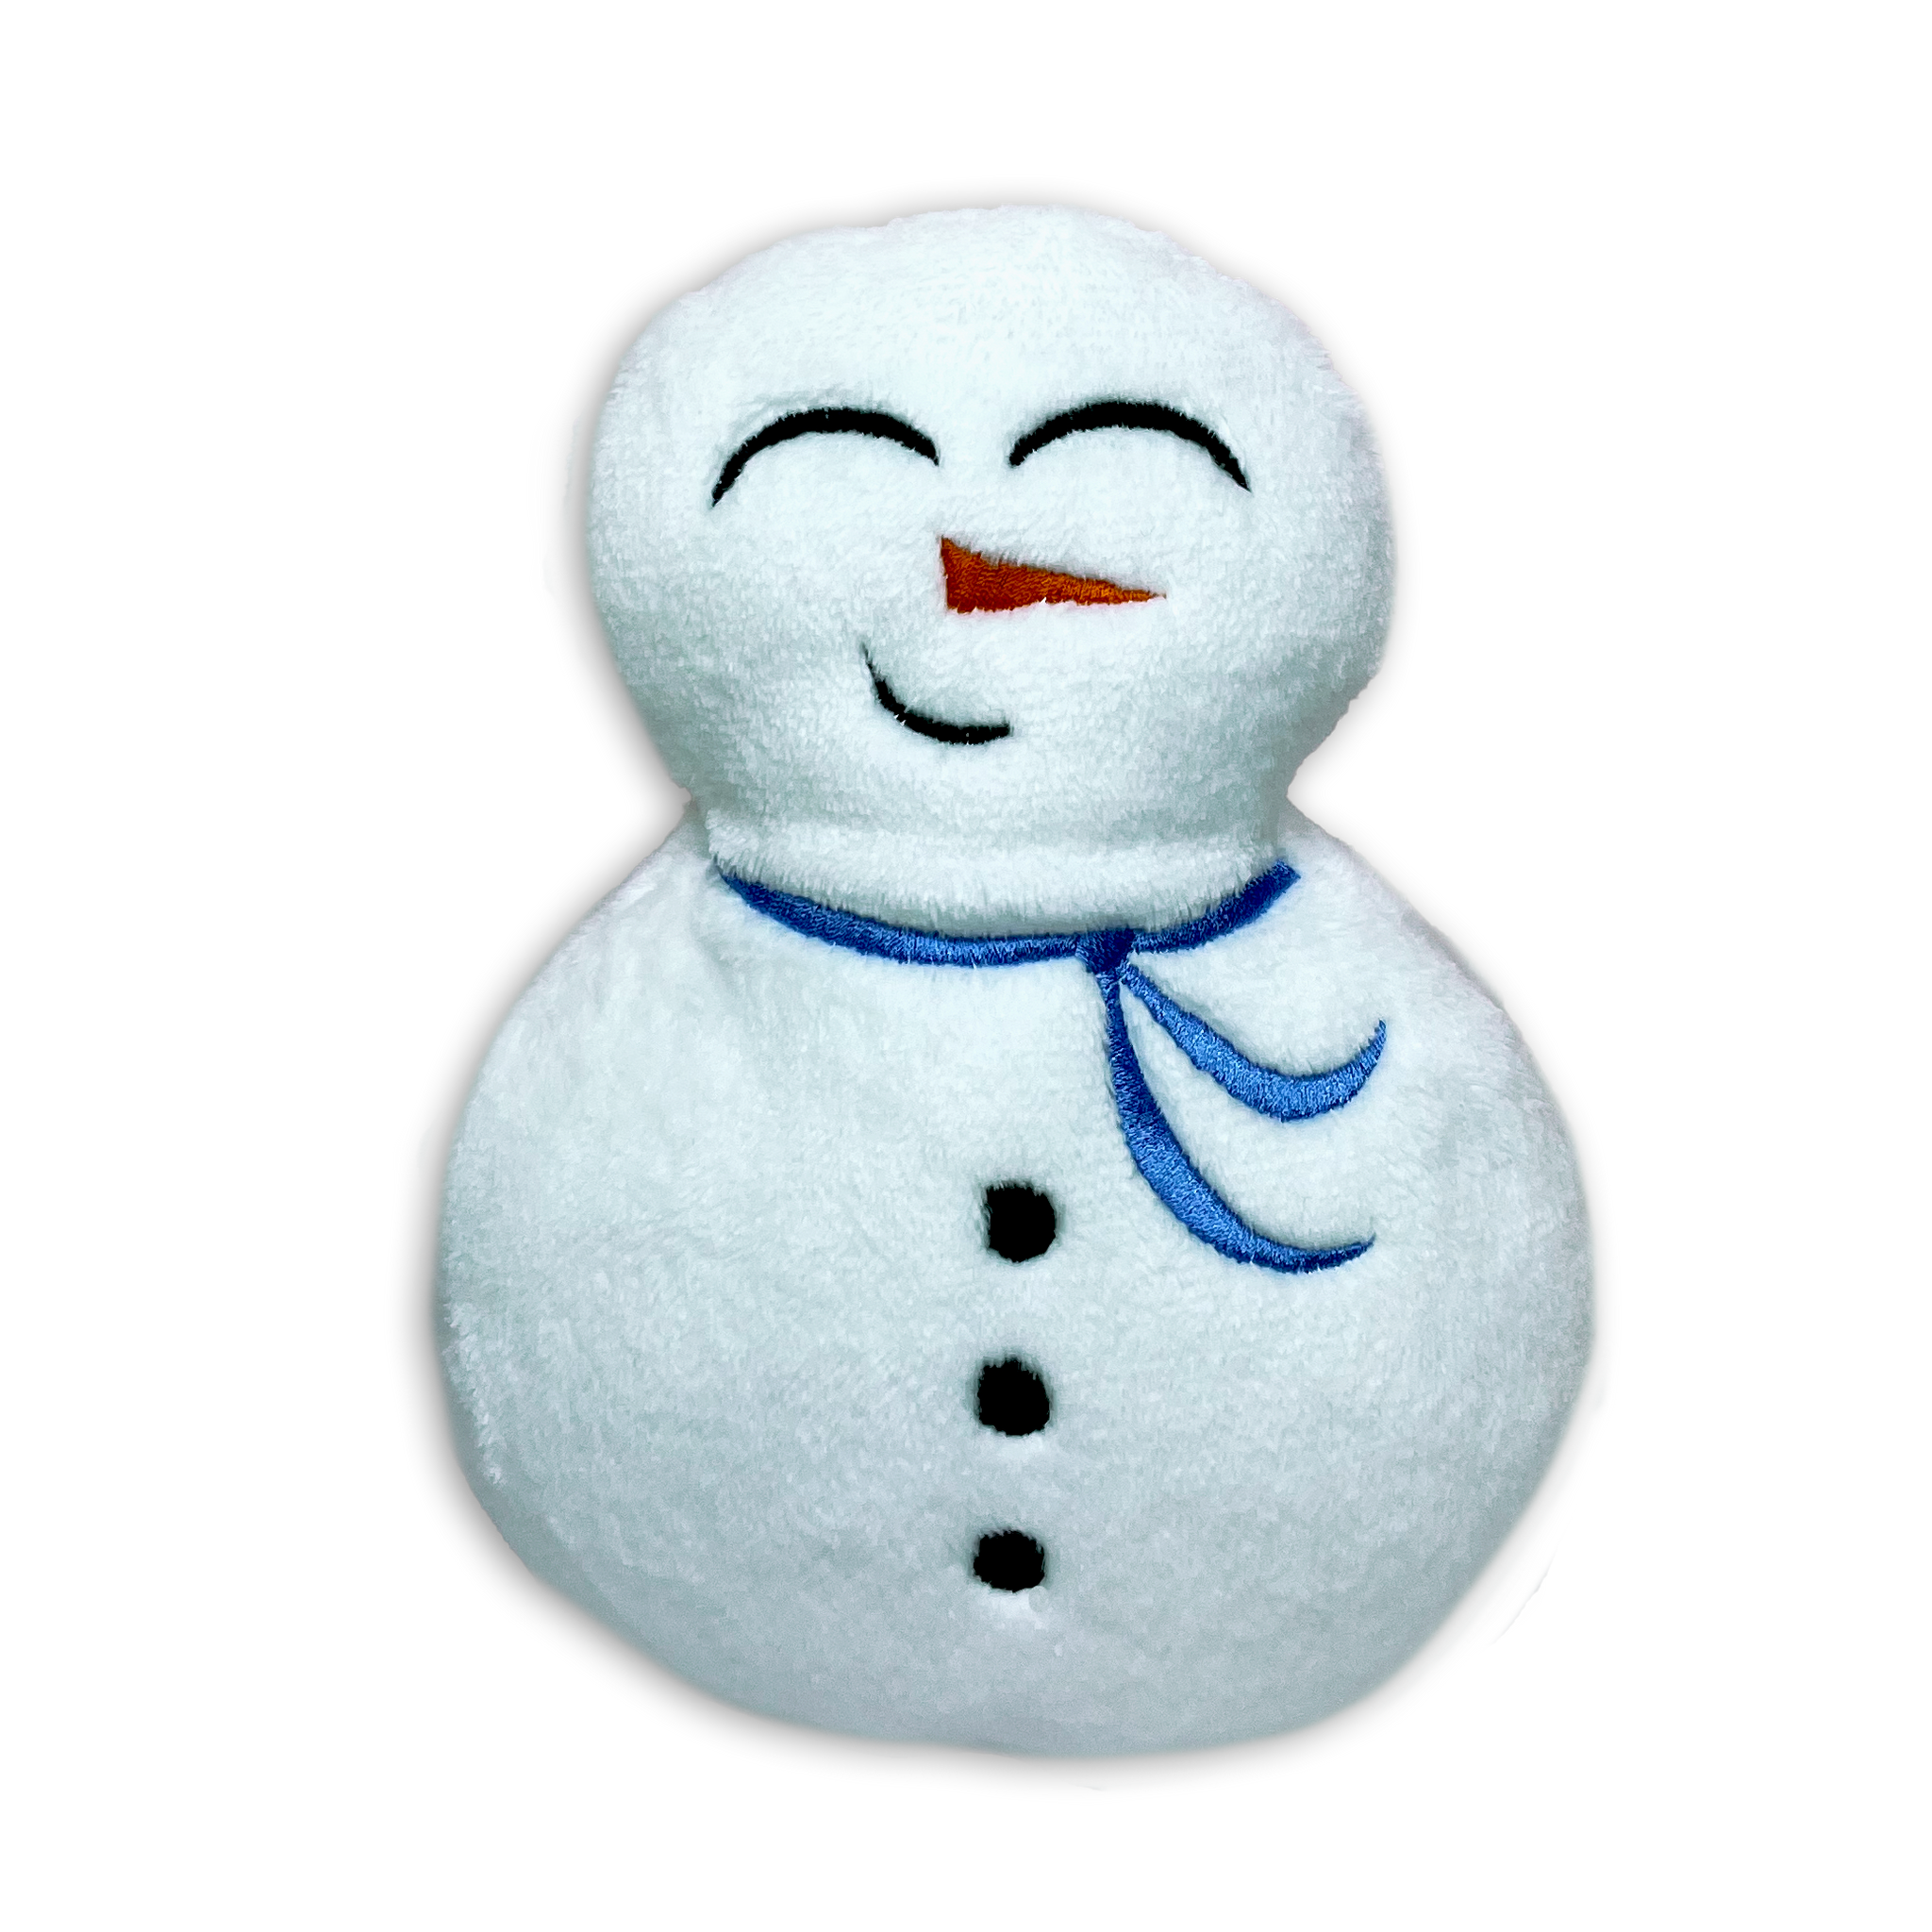 One Savvy Mom ™  NYC Area Mom Blog: Mini Embroidery Hoop Snowman  Ornaments- Kids Sewing Series at One Savvy Mom™ Project #7